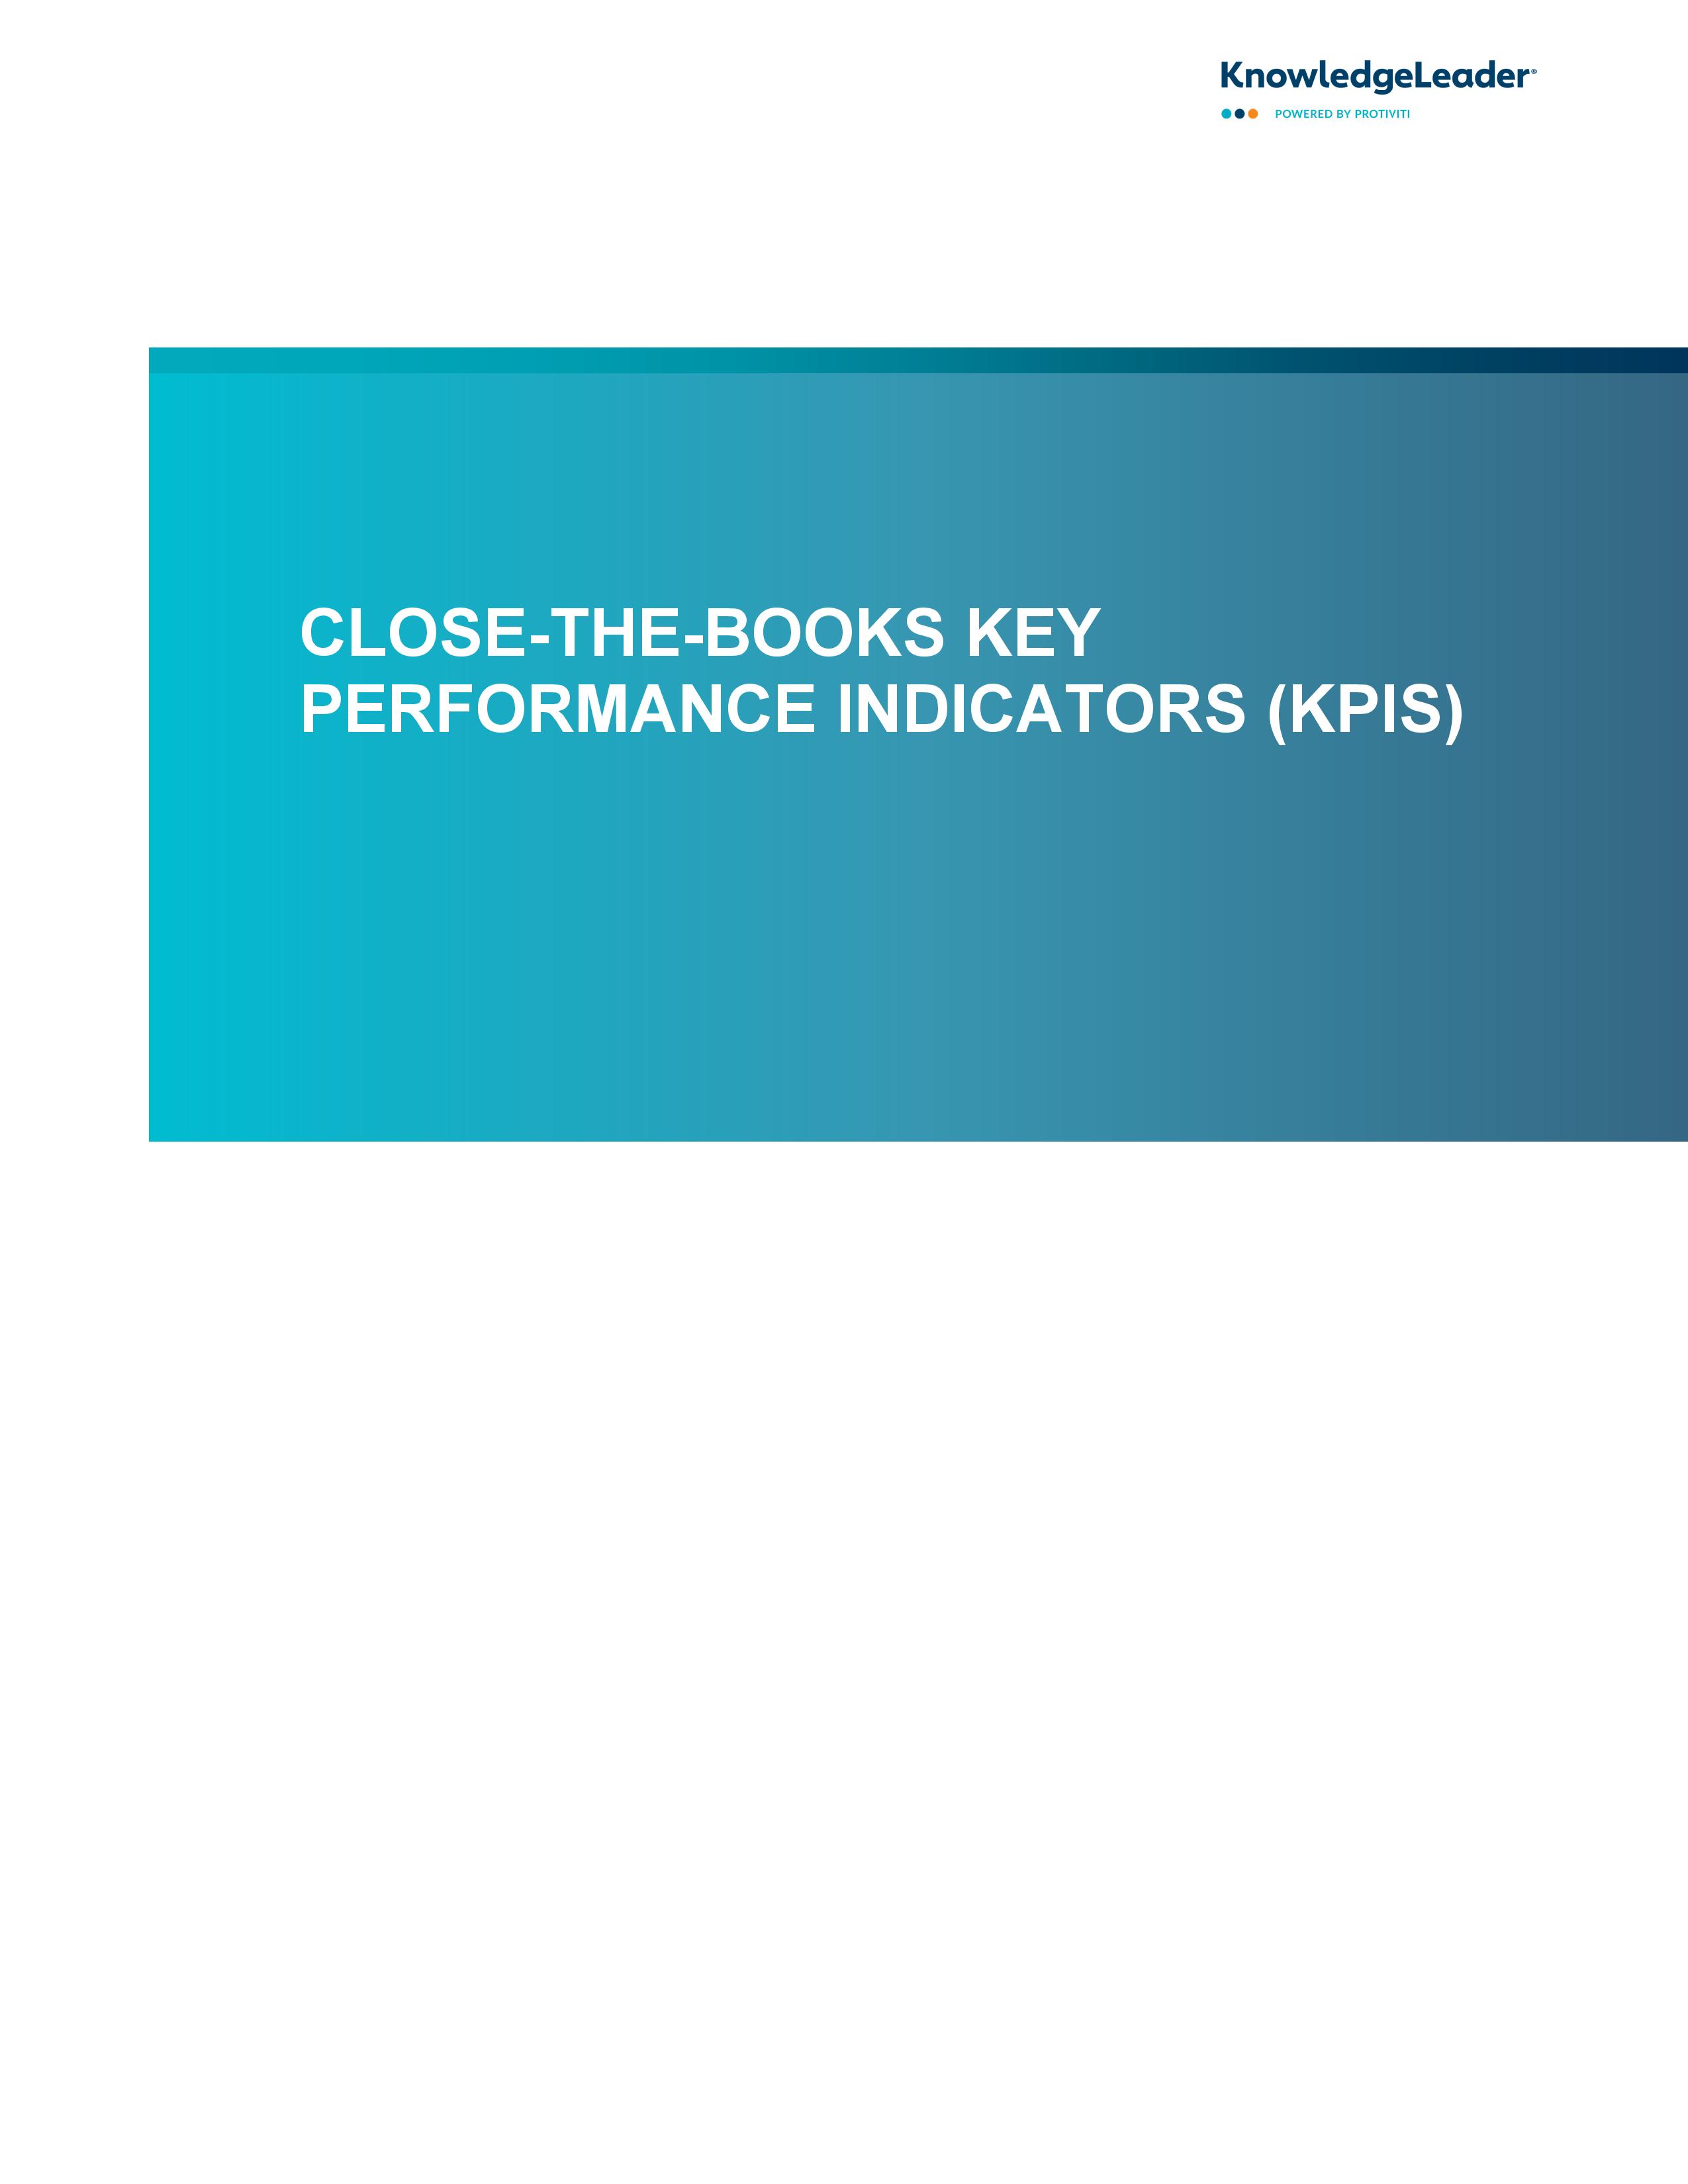 screenshot of the first page of Close-the-Books Key Performance Indicators (KPIs)